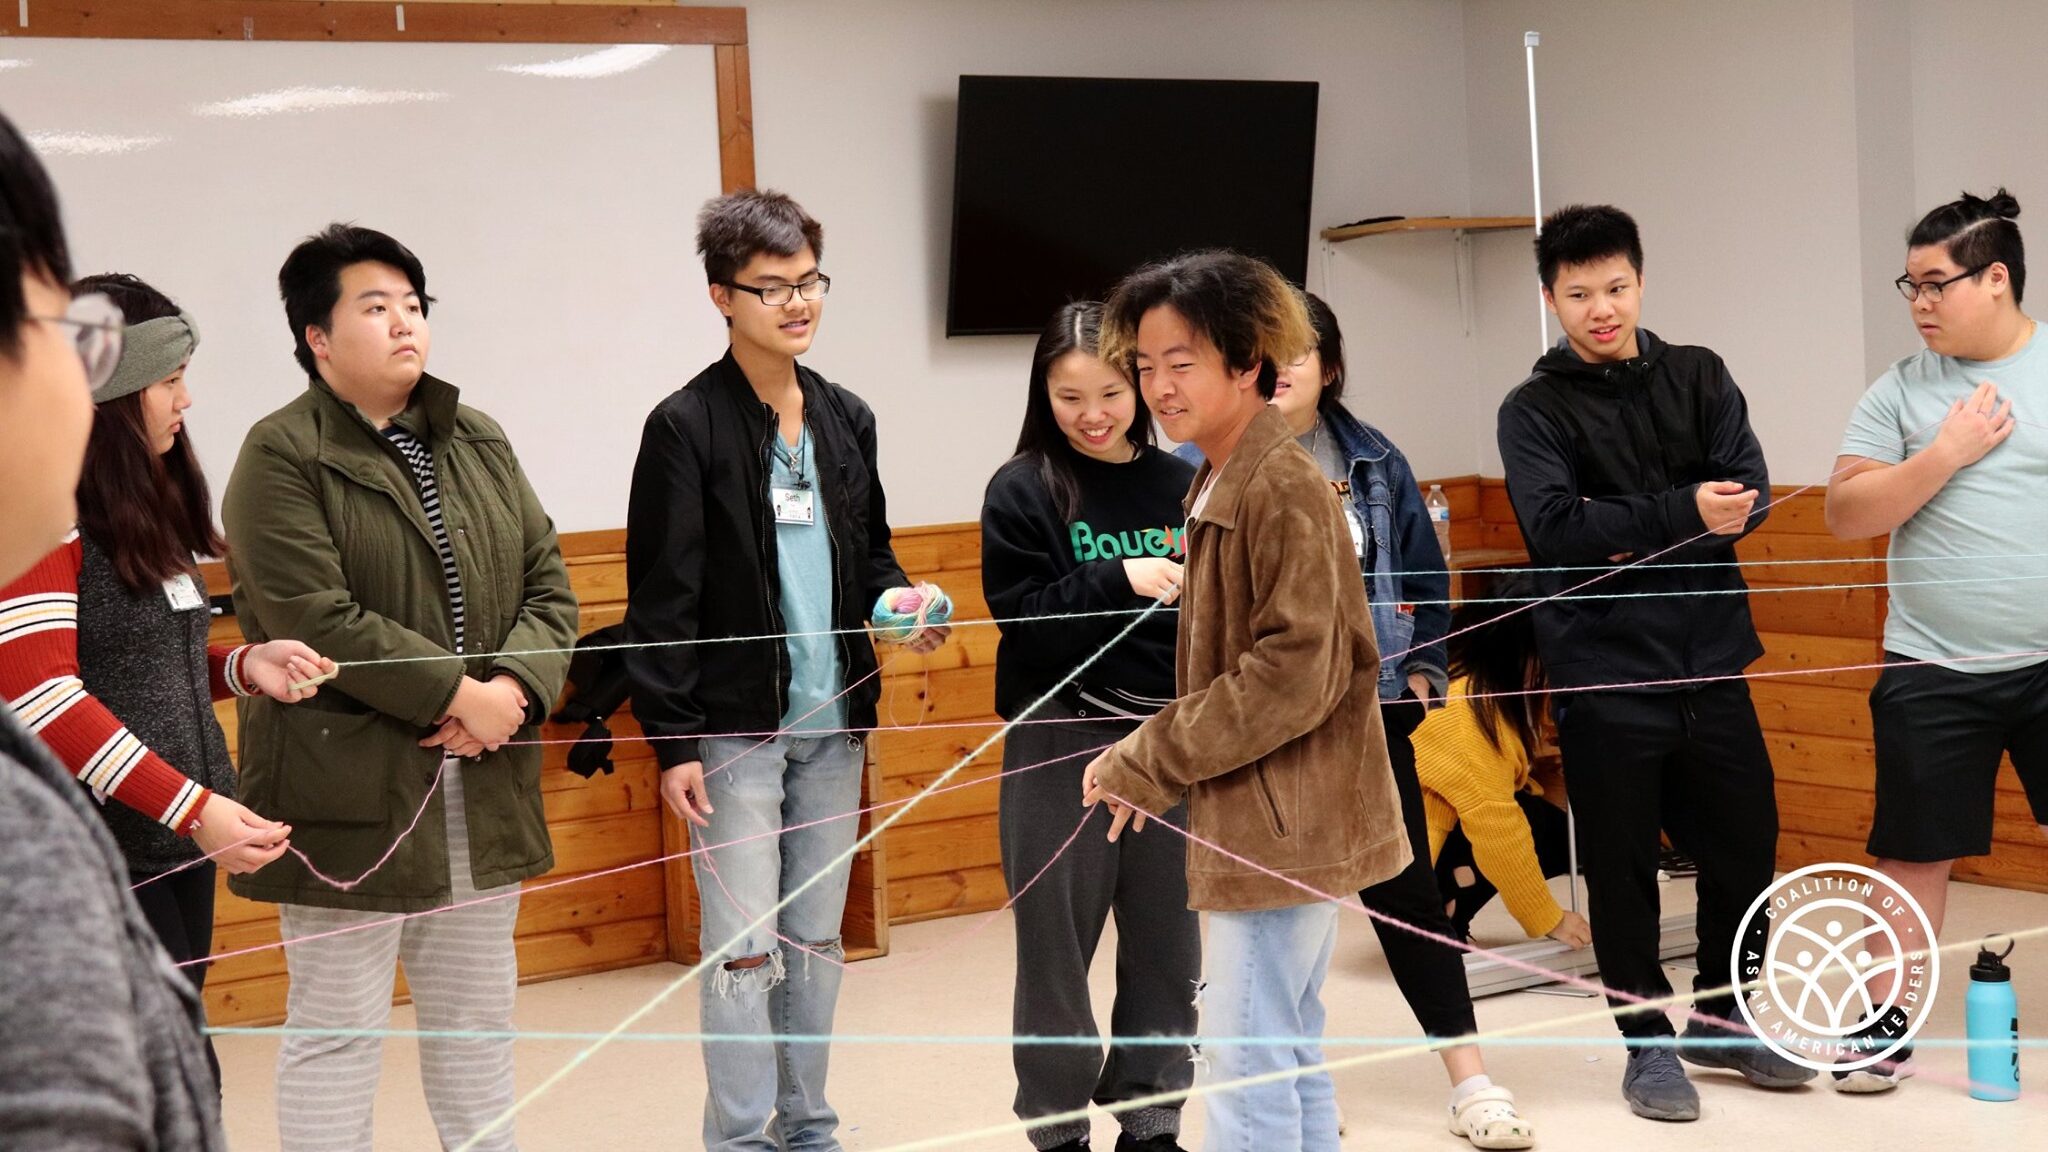 Nine youth stand in a circle holding strings at a Coalition of Asian American Leaders event